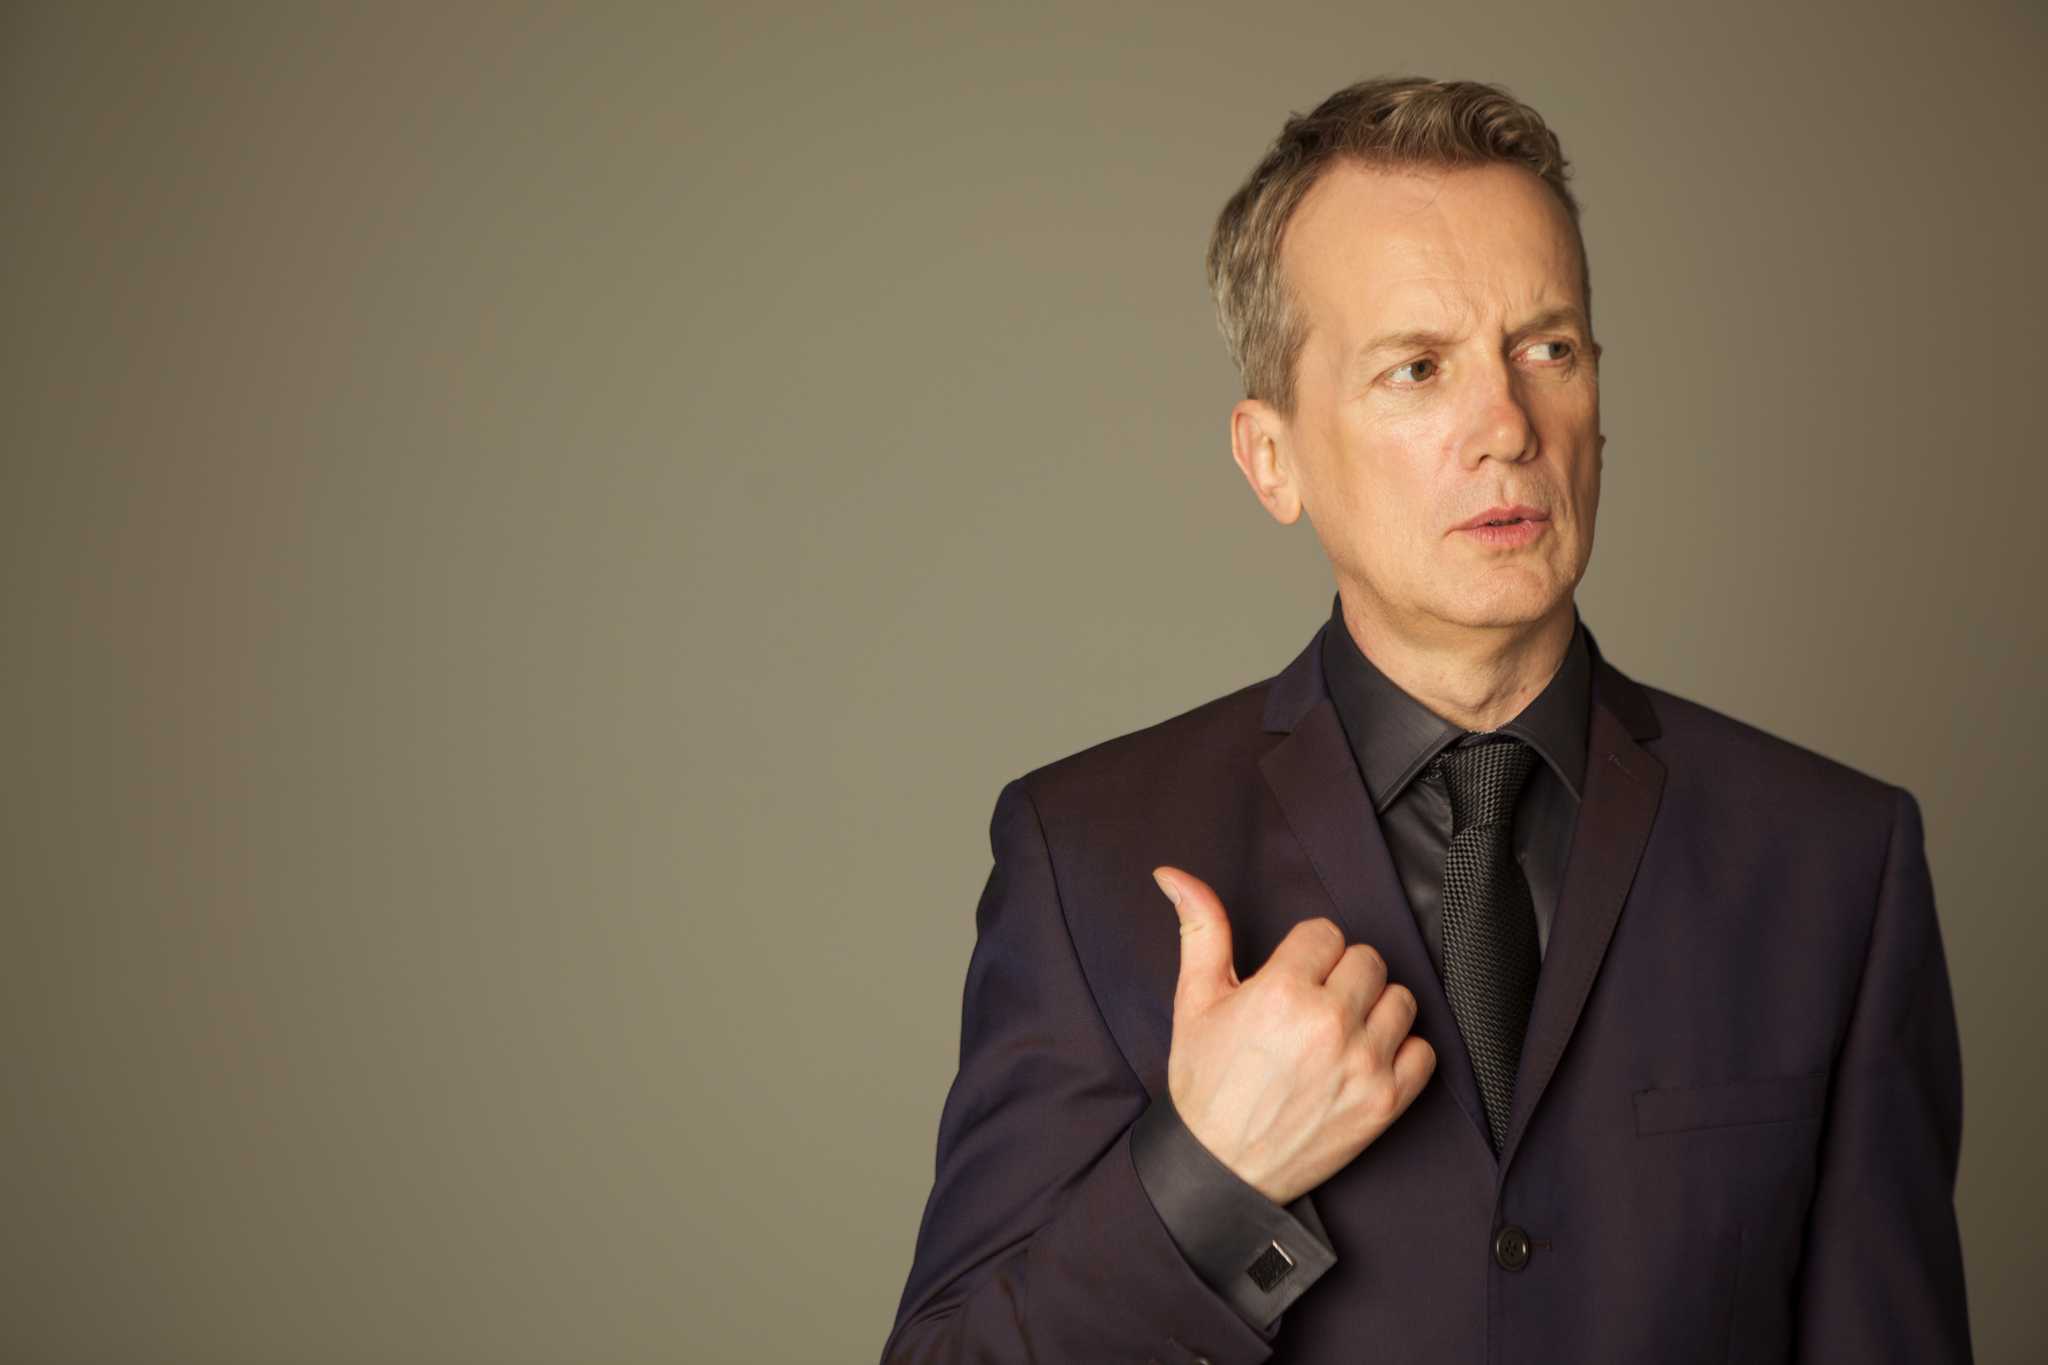 Frank Skinner does a South African accent